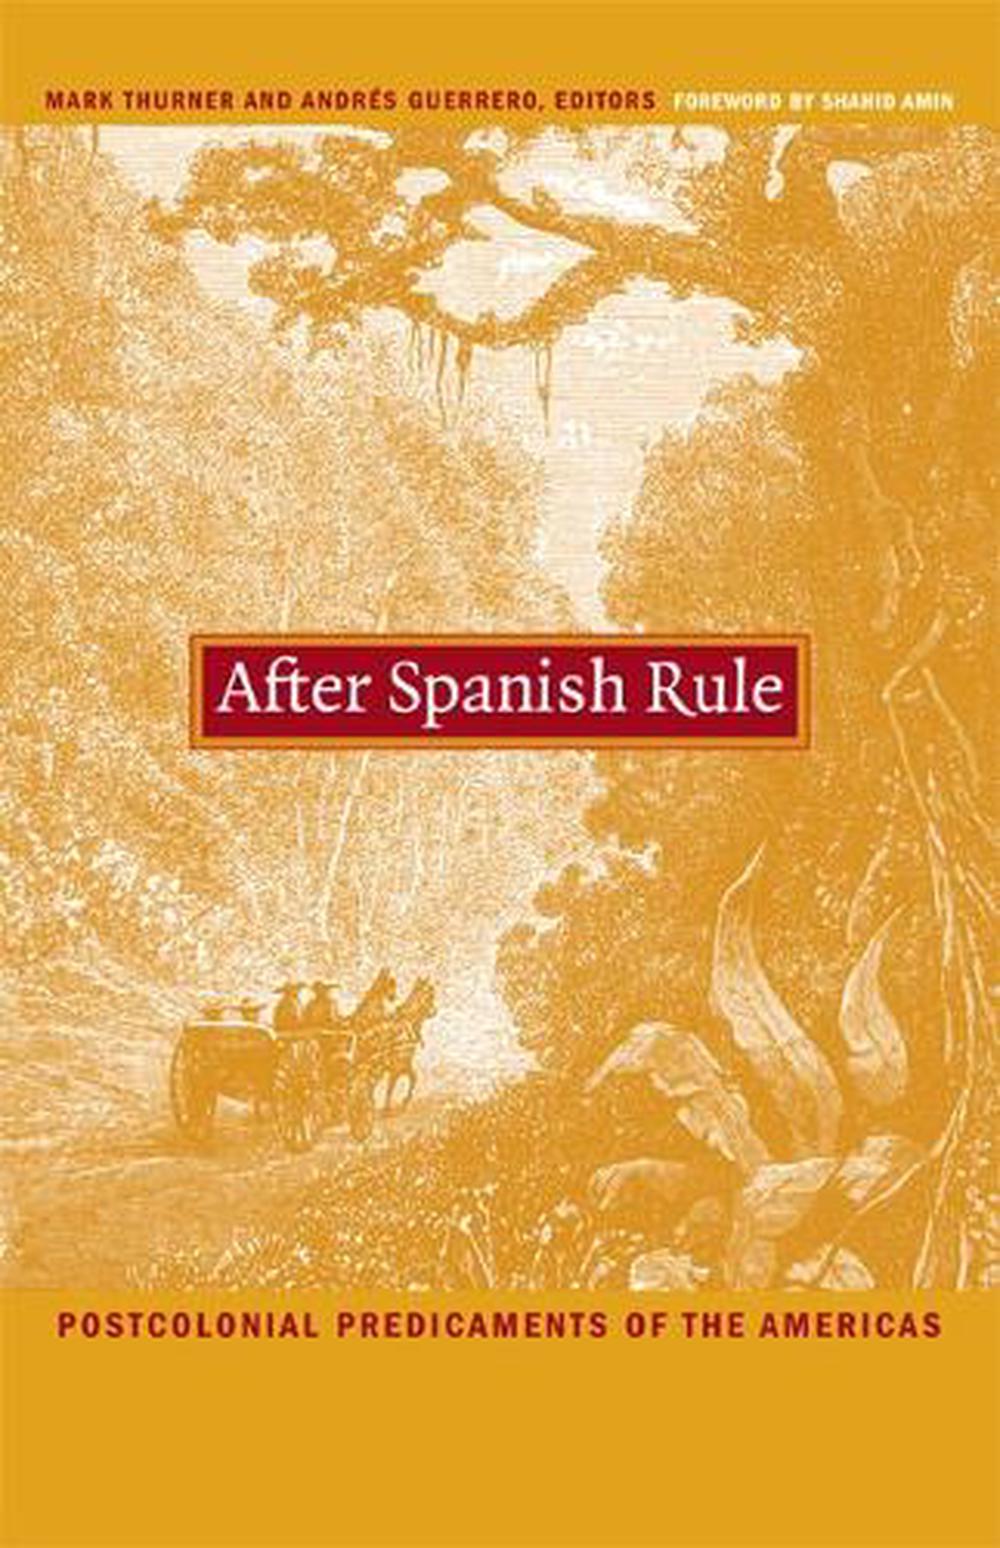 After Spanish Rule Postcolonial Predicaments of the Americas by Andres